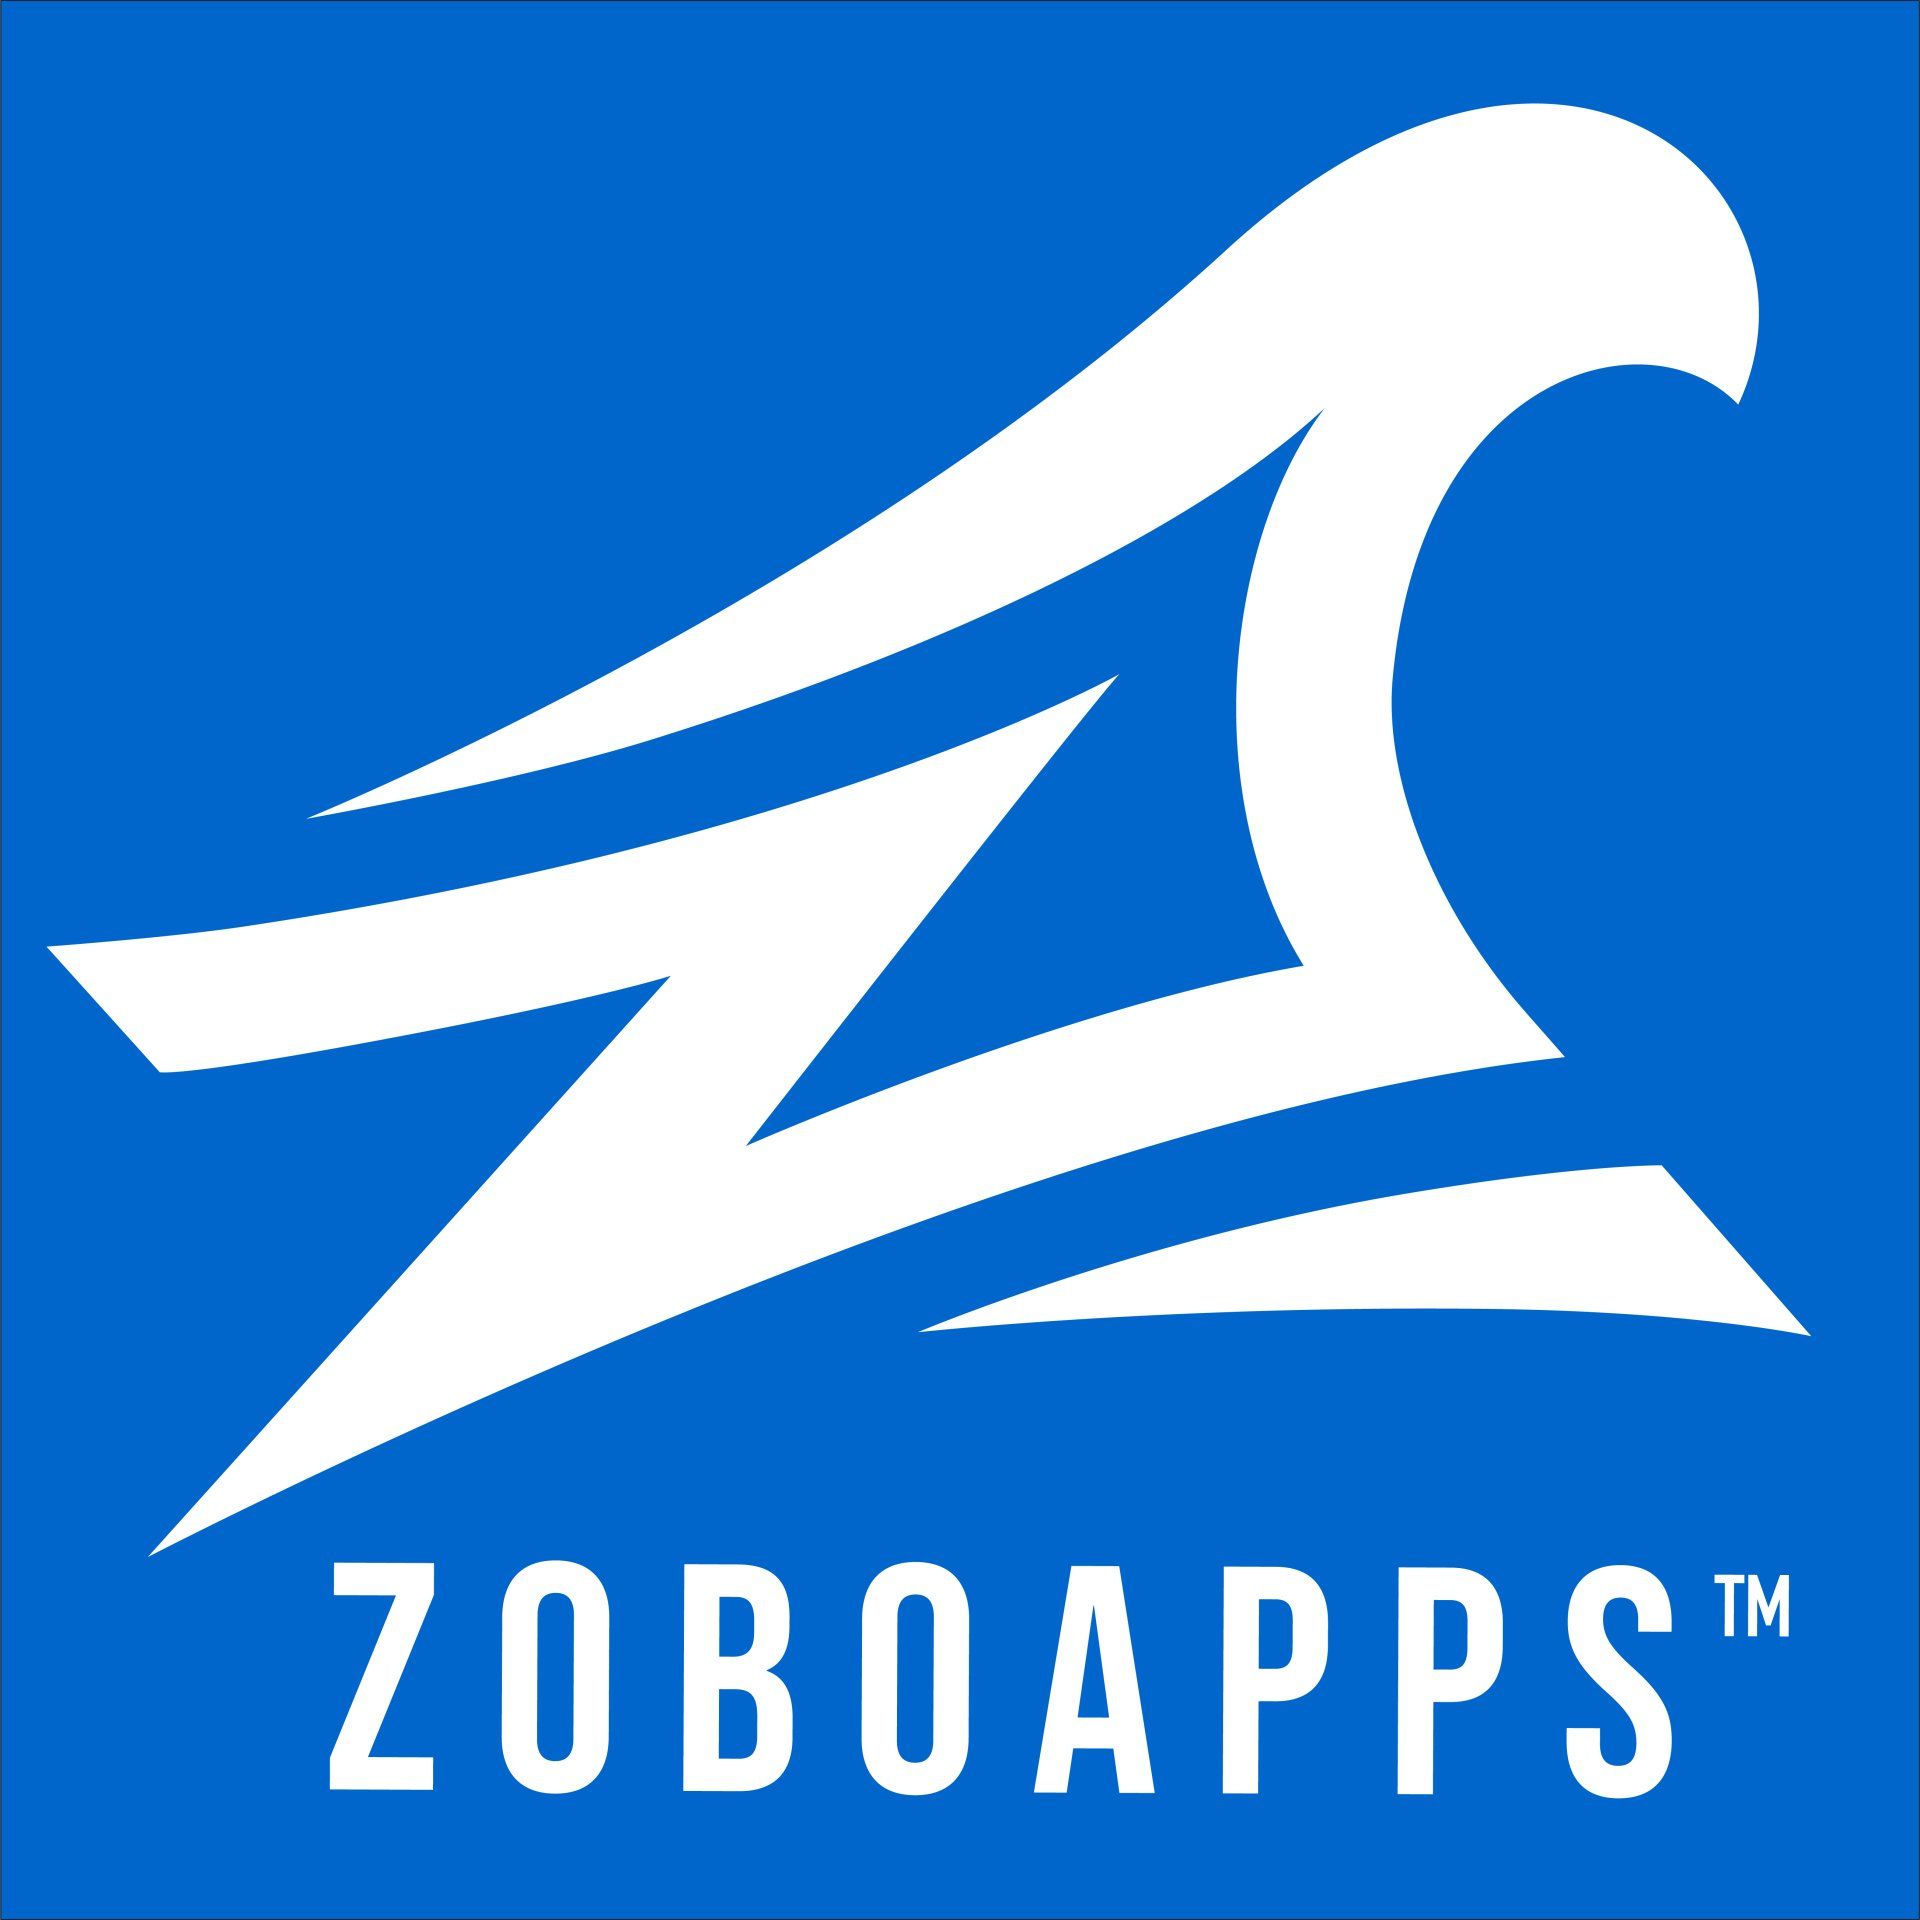 ZOBOAPPS HOME PAGE